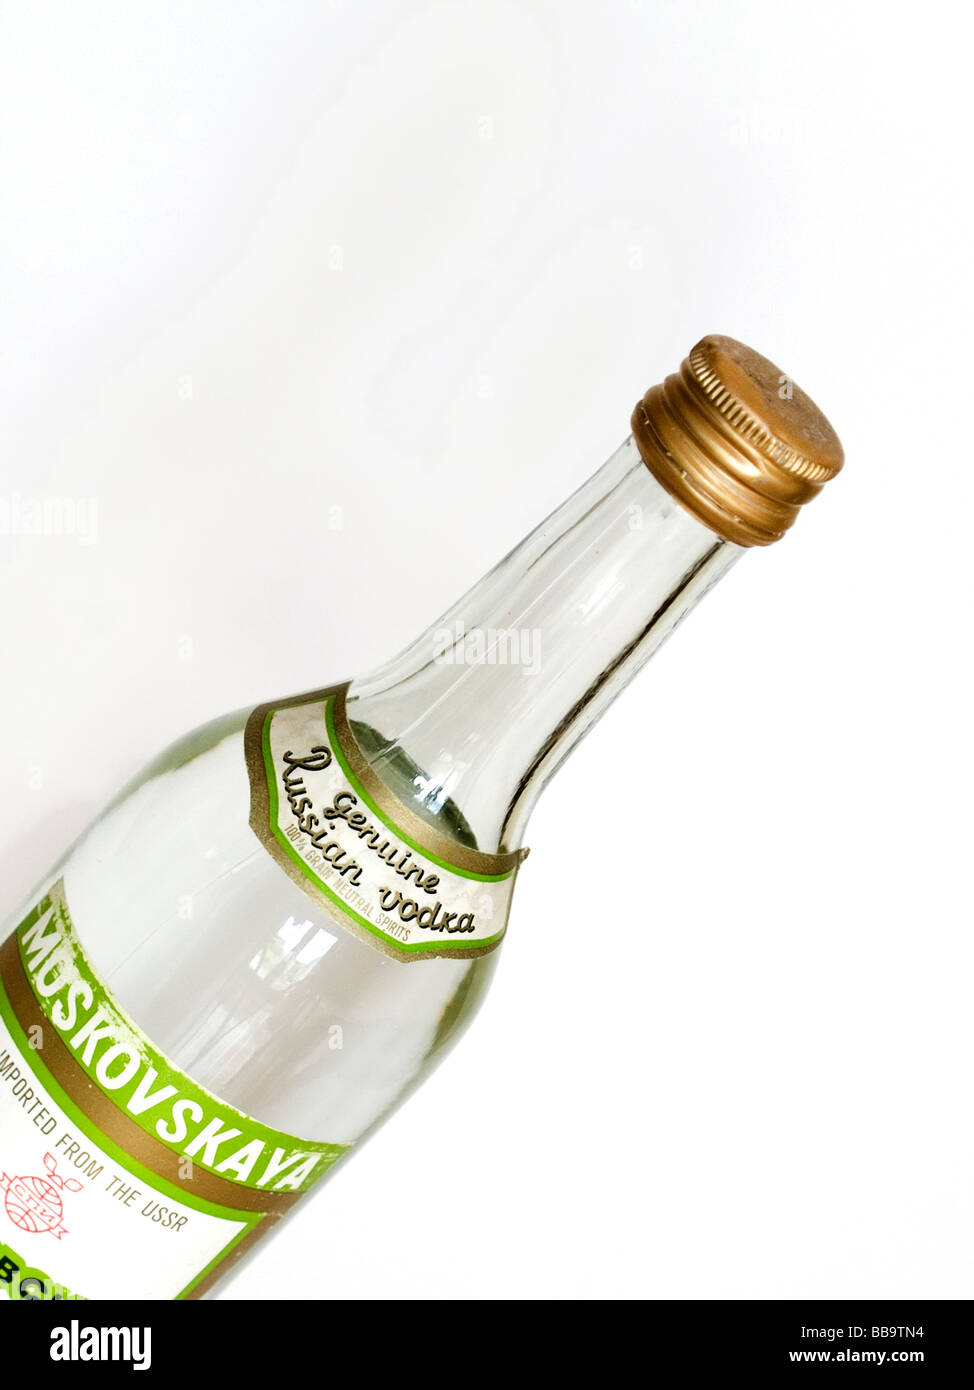 Cut out of a bottle of Genuine Russian Vodka imported from the USSR in 1988 on a white background Stock Photo